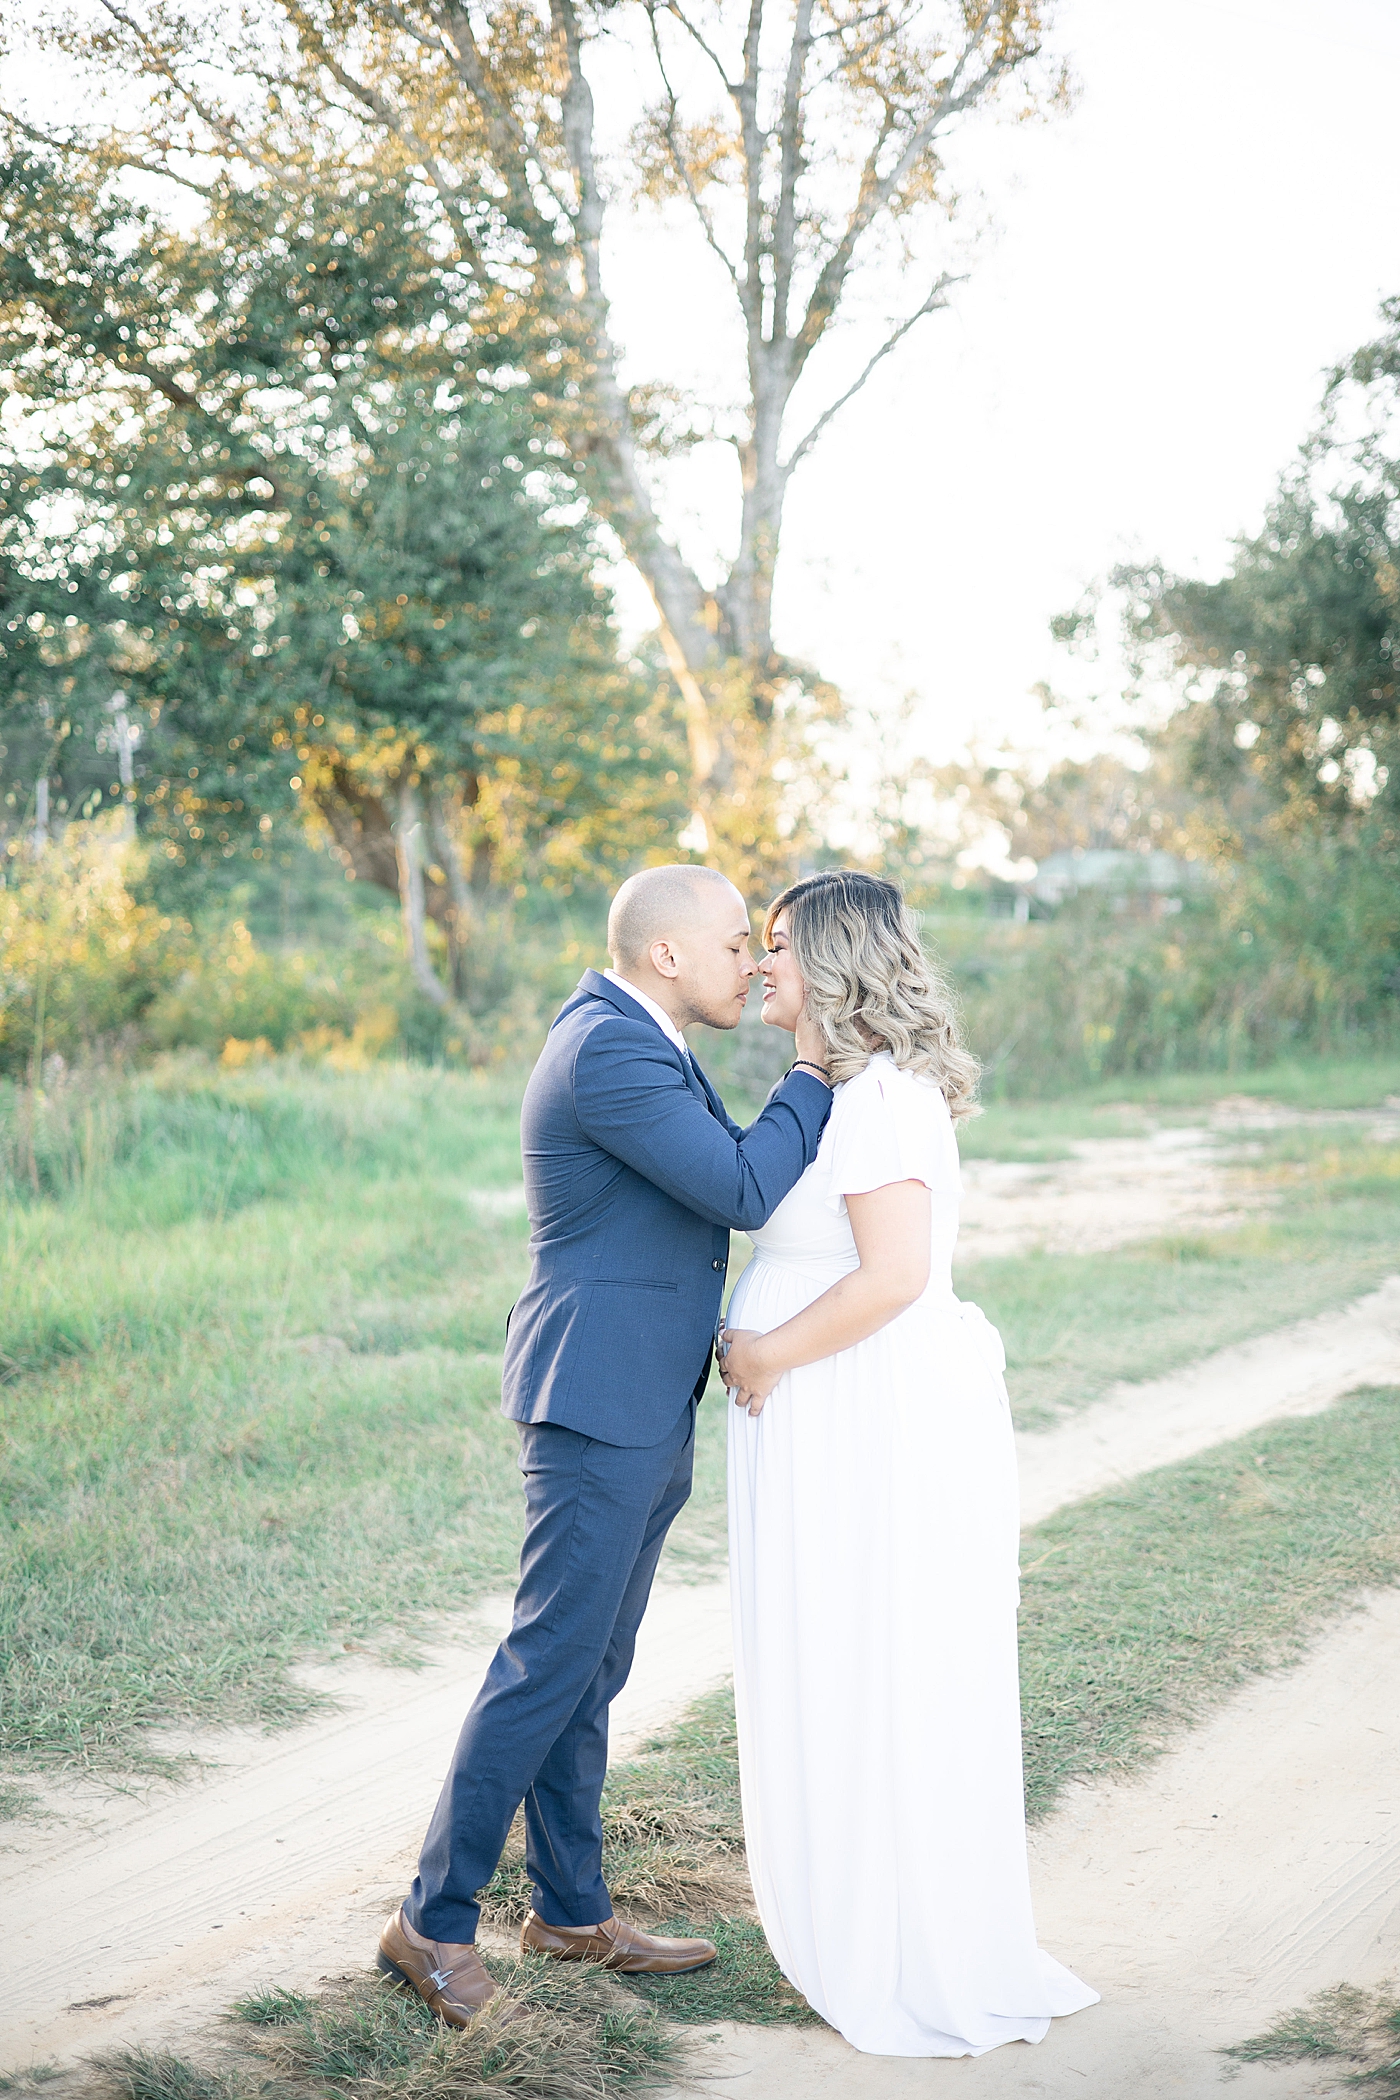 Mom and dad to be kissing while on a dirt path | Photo by Gulfport MS Maternity and Newborn Photographer Little Sunshine Photography 